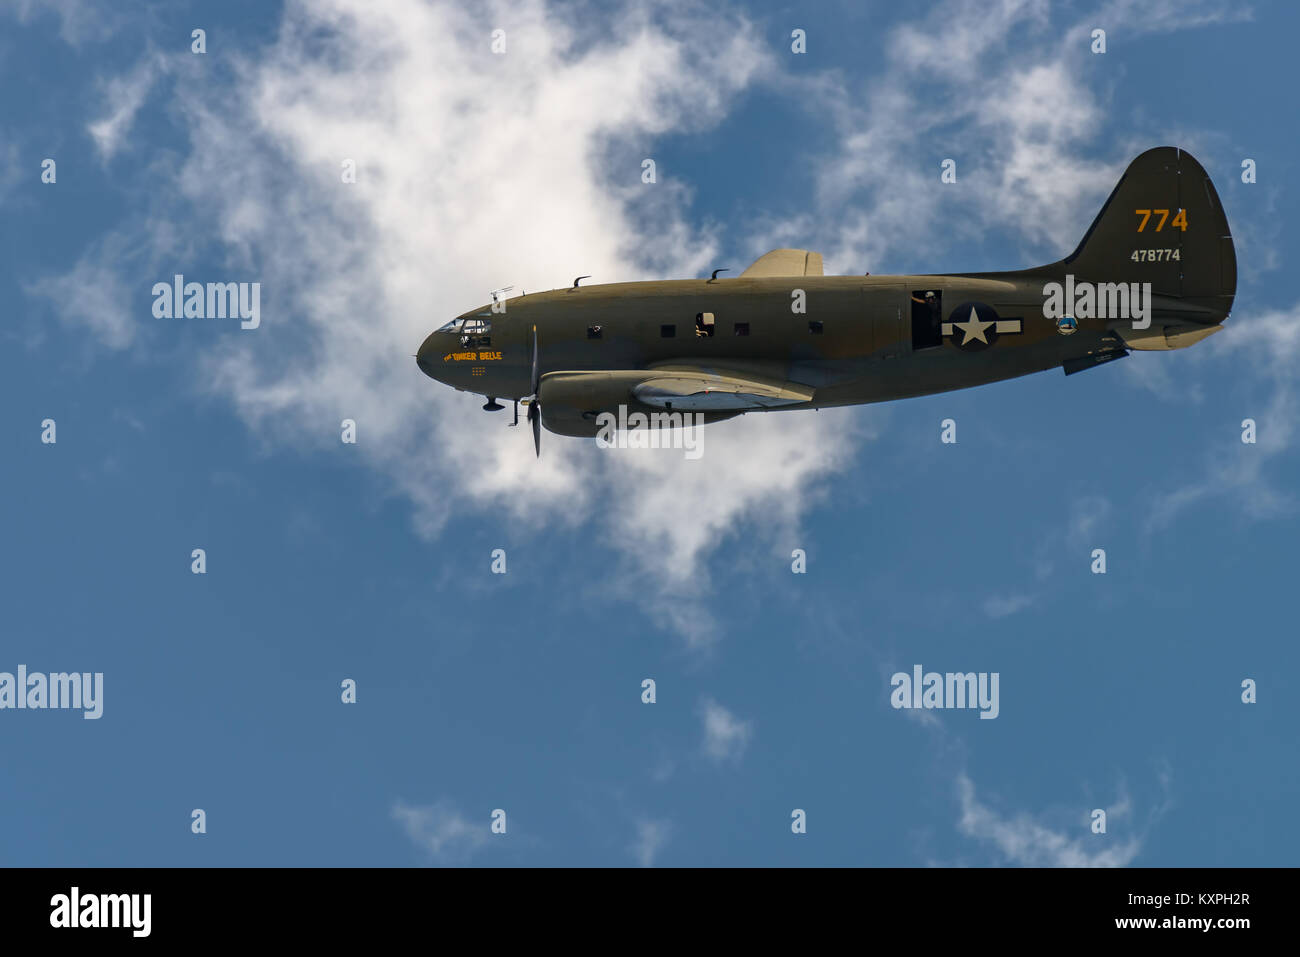 READING, PA - JUNE 3, 2017: CURTISS C-46 "COMMANDO"'TINKER BELLE'in flight during World War II reenactment at Mid-Atlantic Air Museum Stock Photo